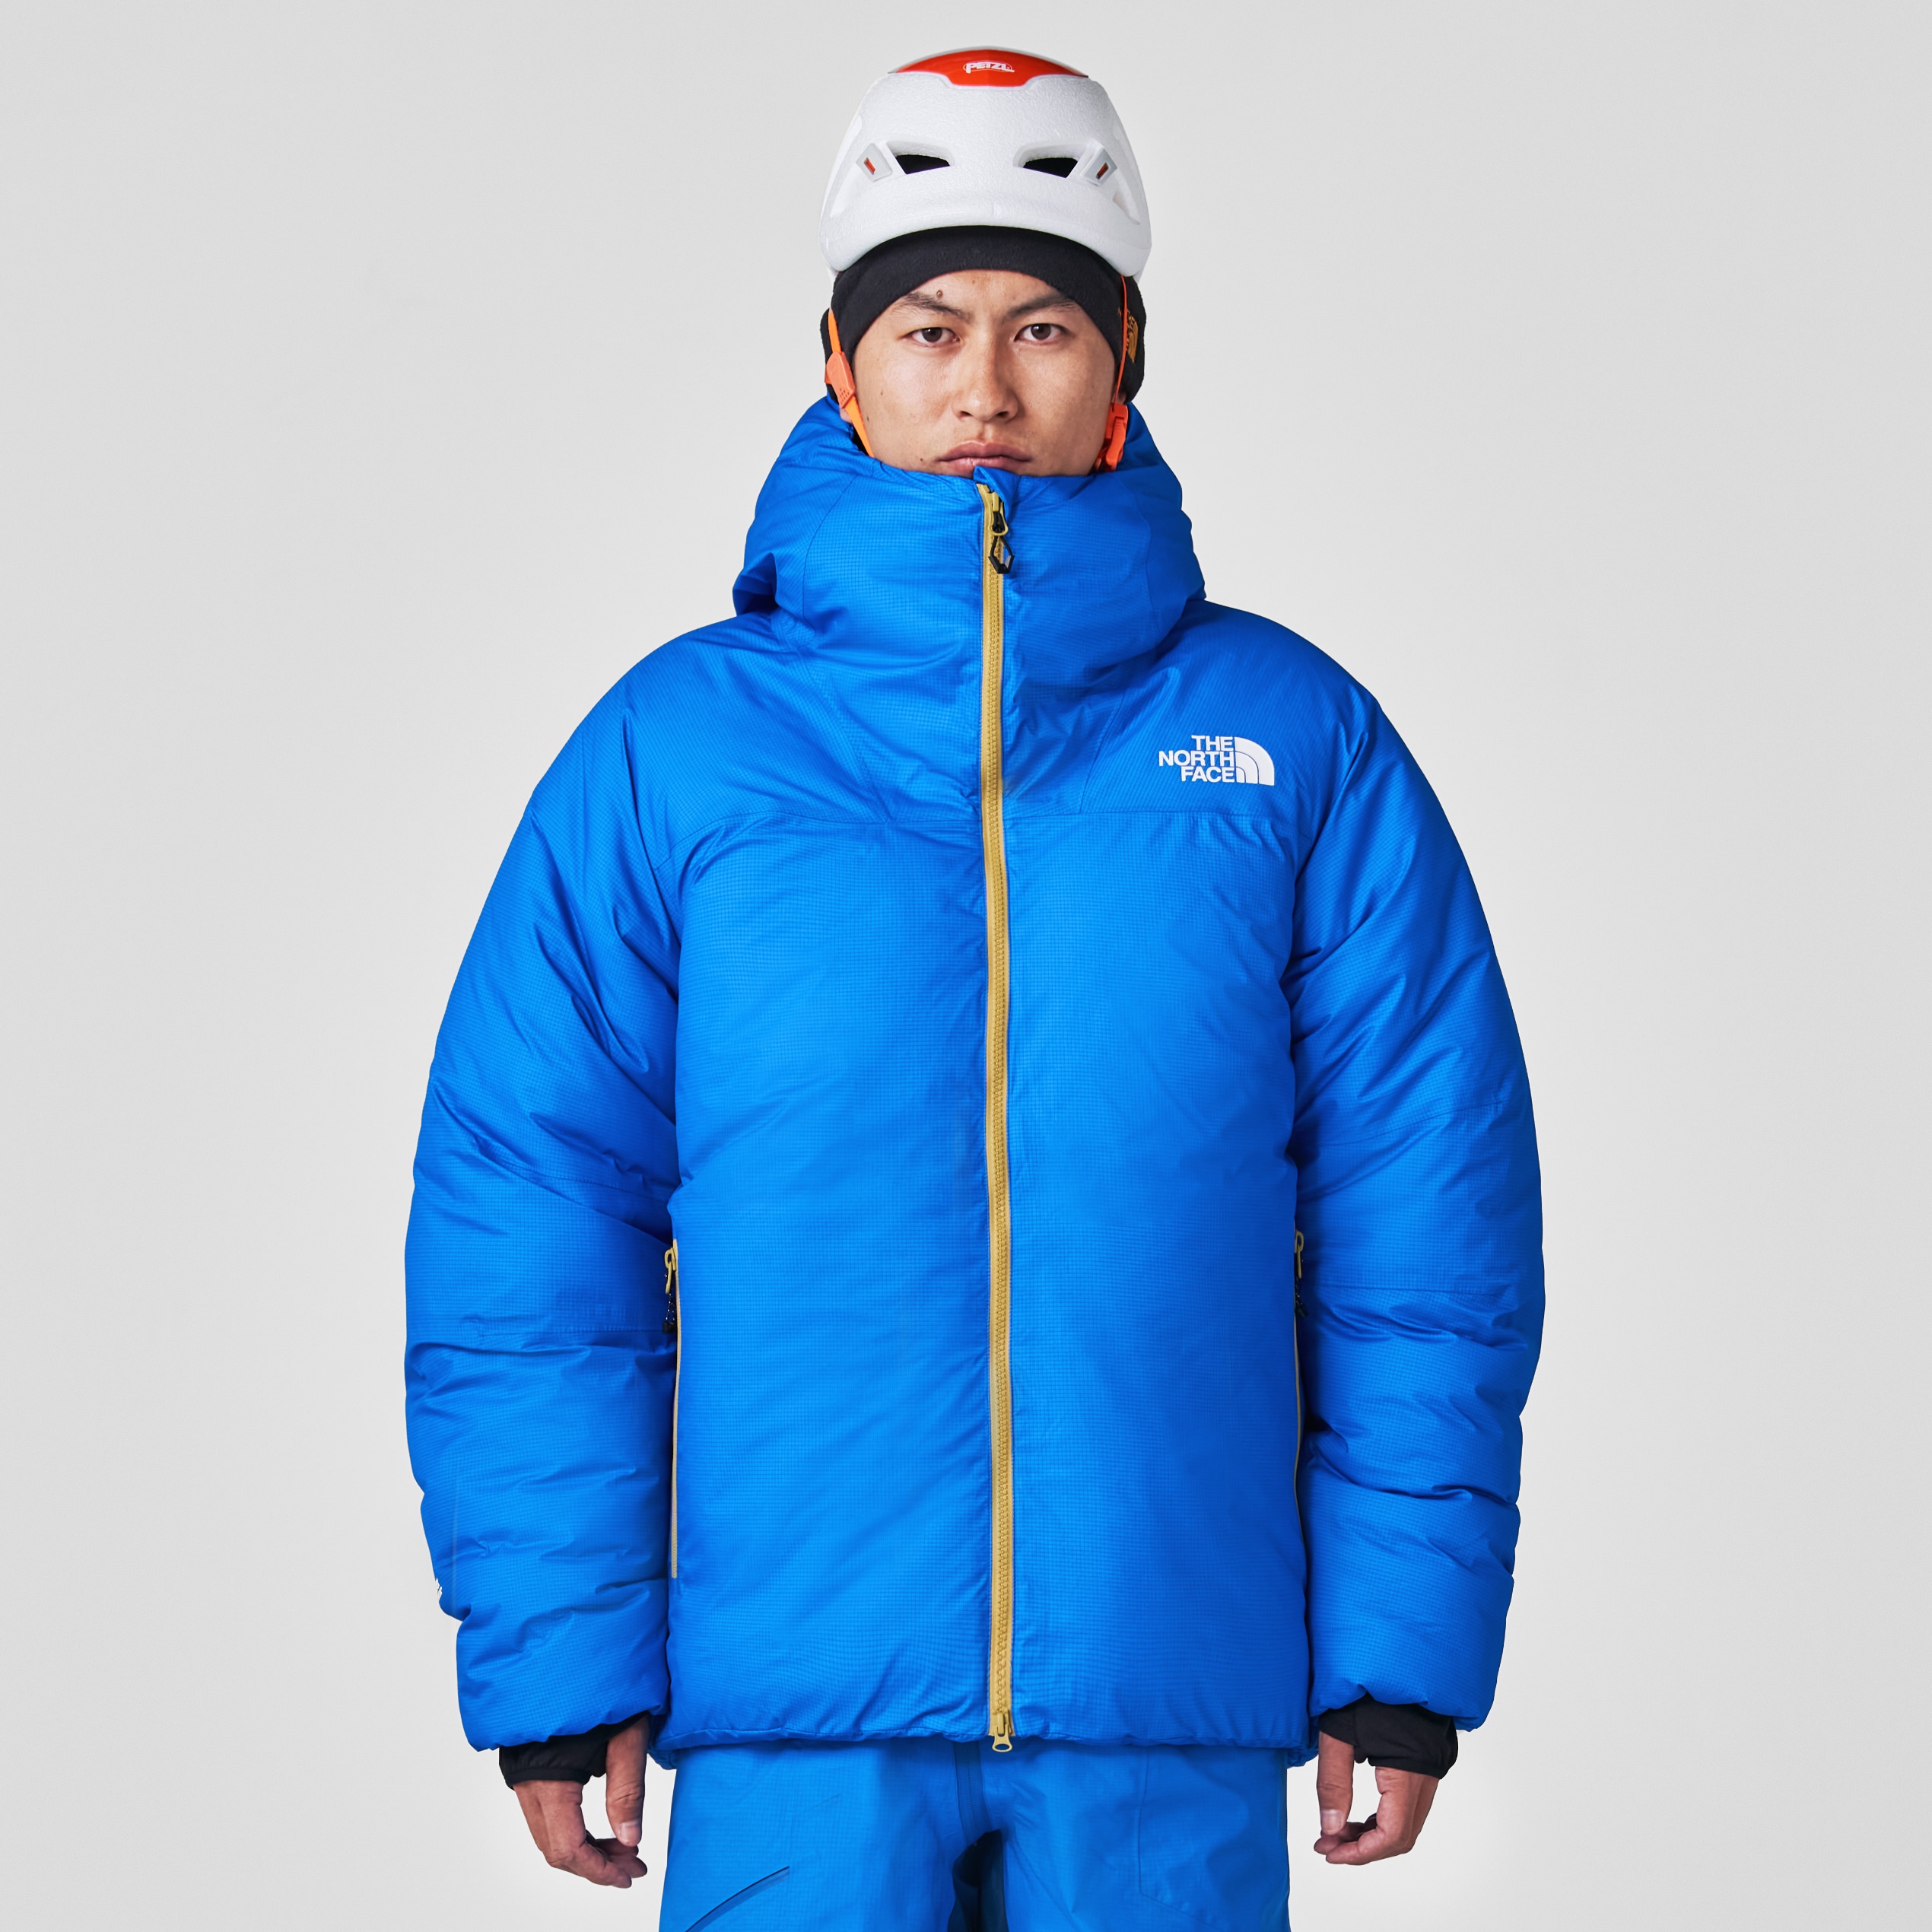 AGLOW DOUBLEWALL JACKET (NP62120 / UNISEX) - THE NORTH FACE MOUNTAIN